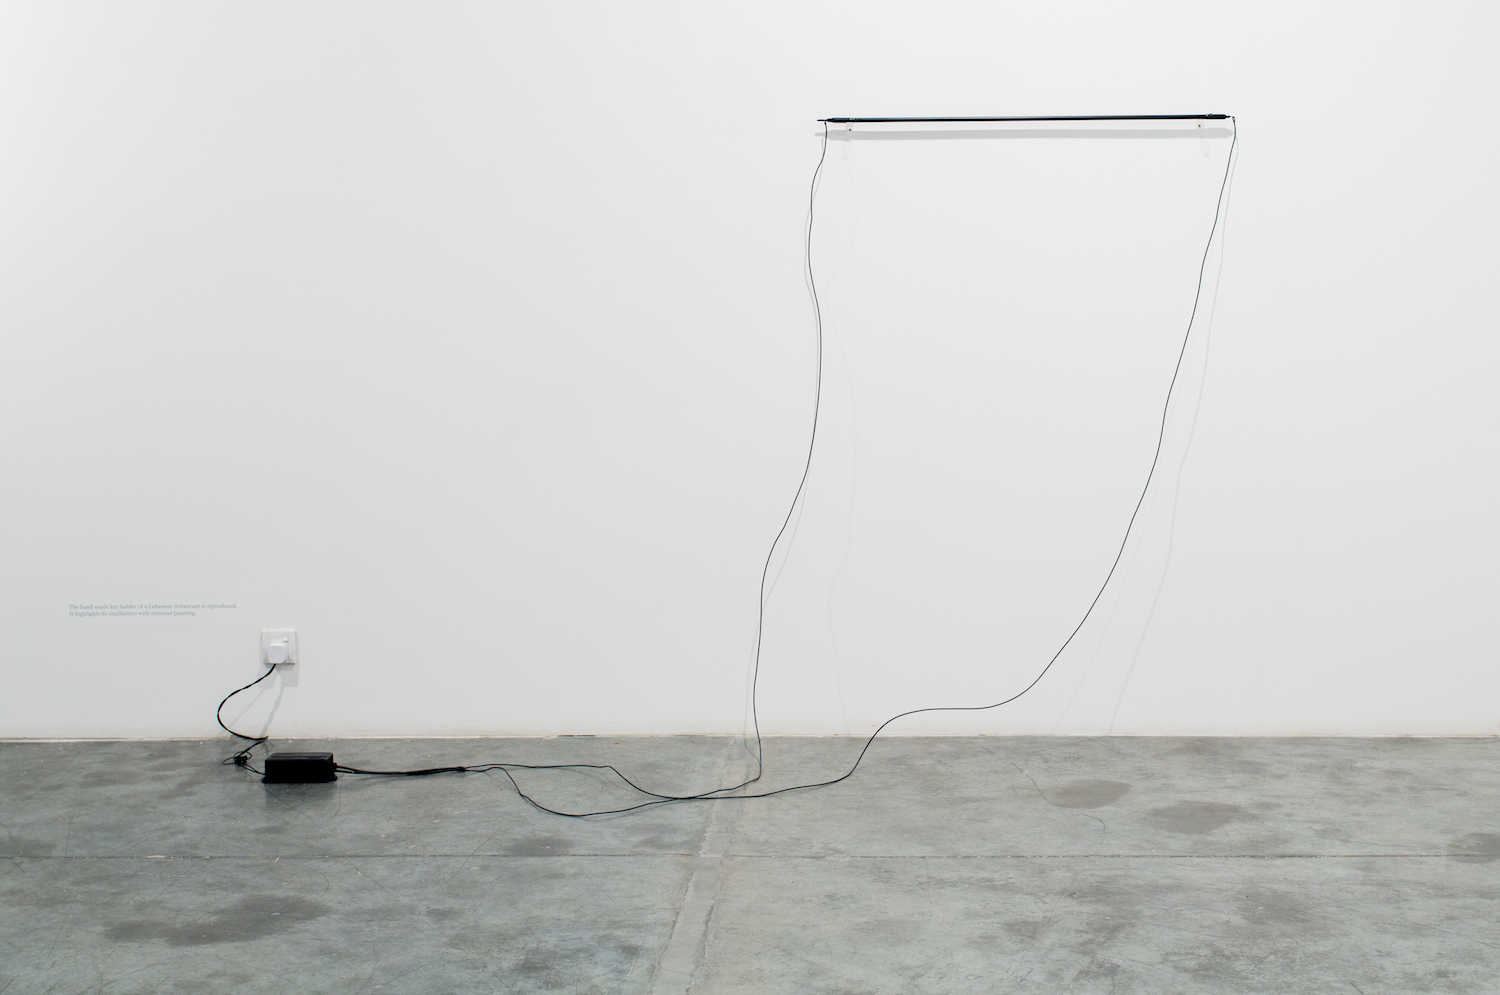  Charbel-joseph H. Boutros  Neon enclosing its own light 2013 Electric neon, black paint, light Variable dimensions 